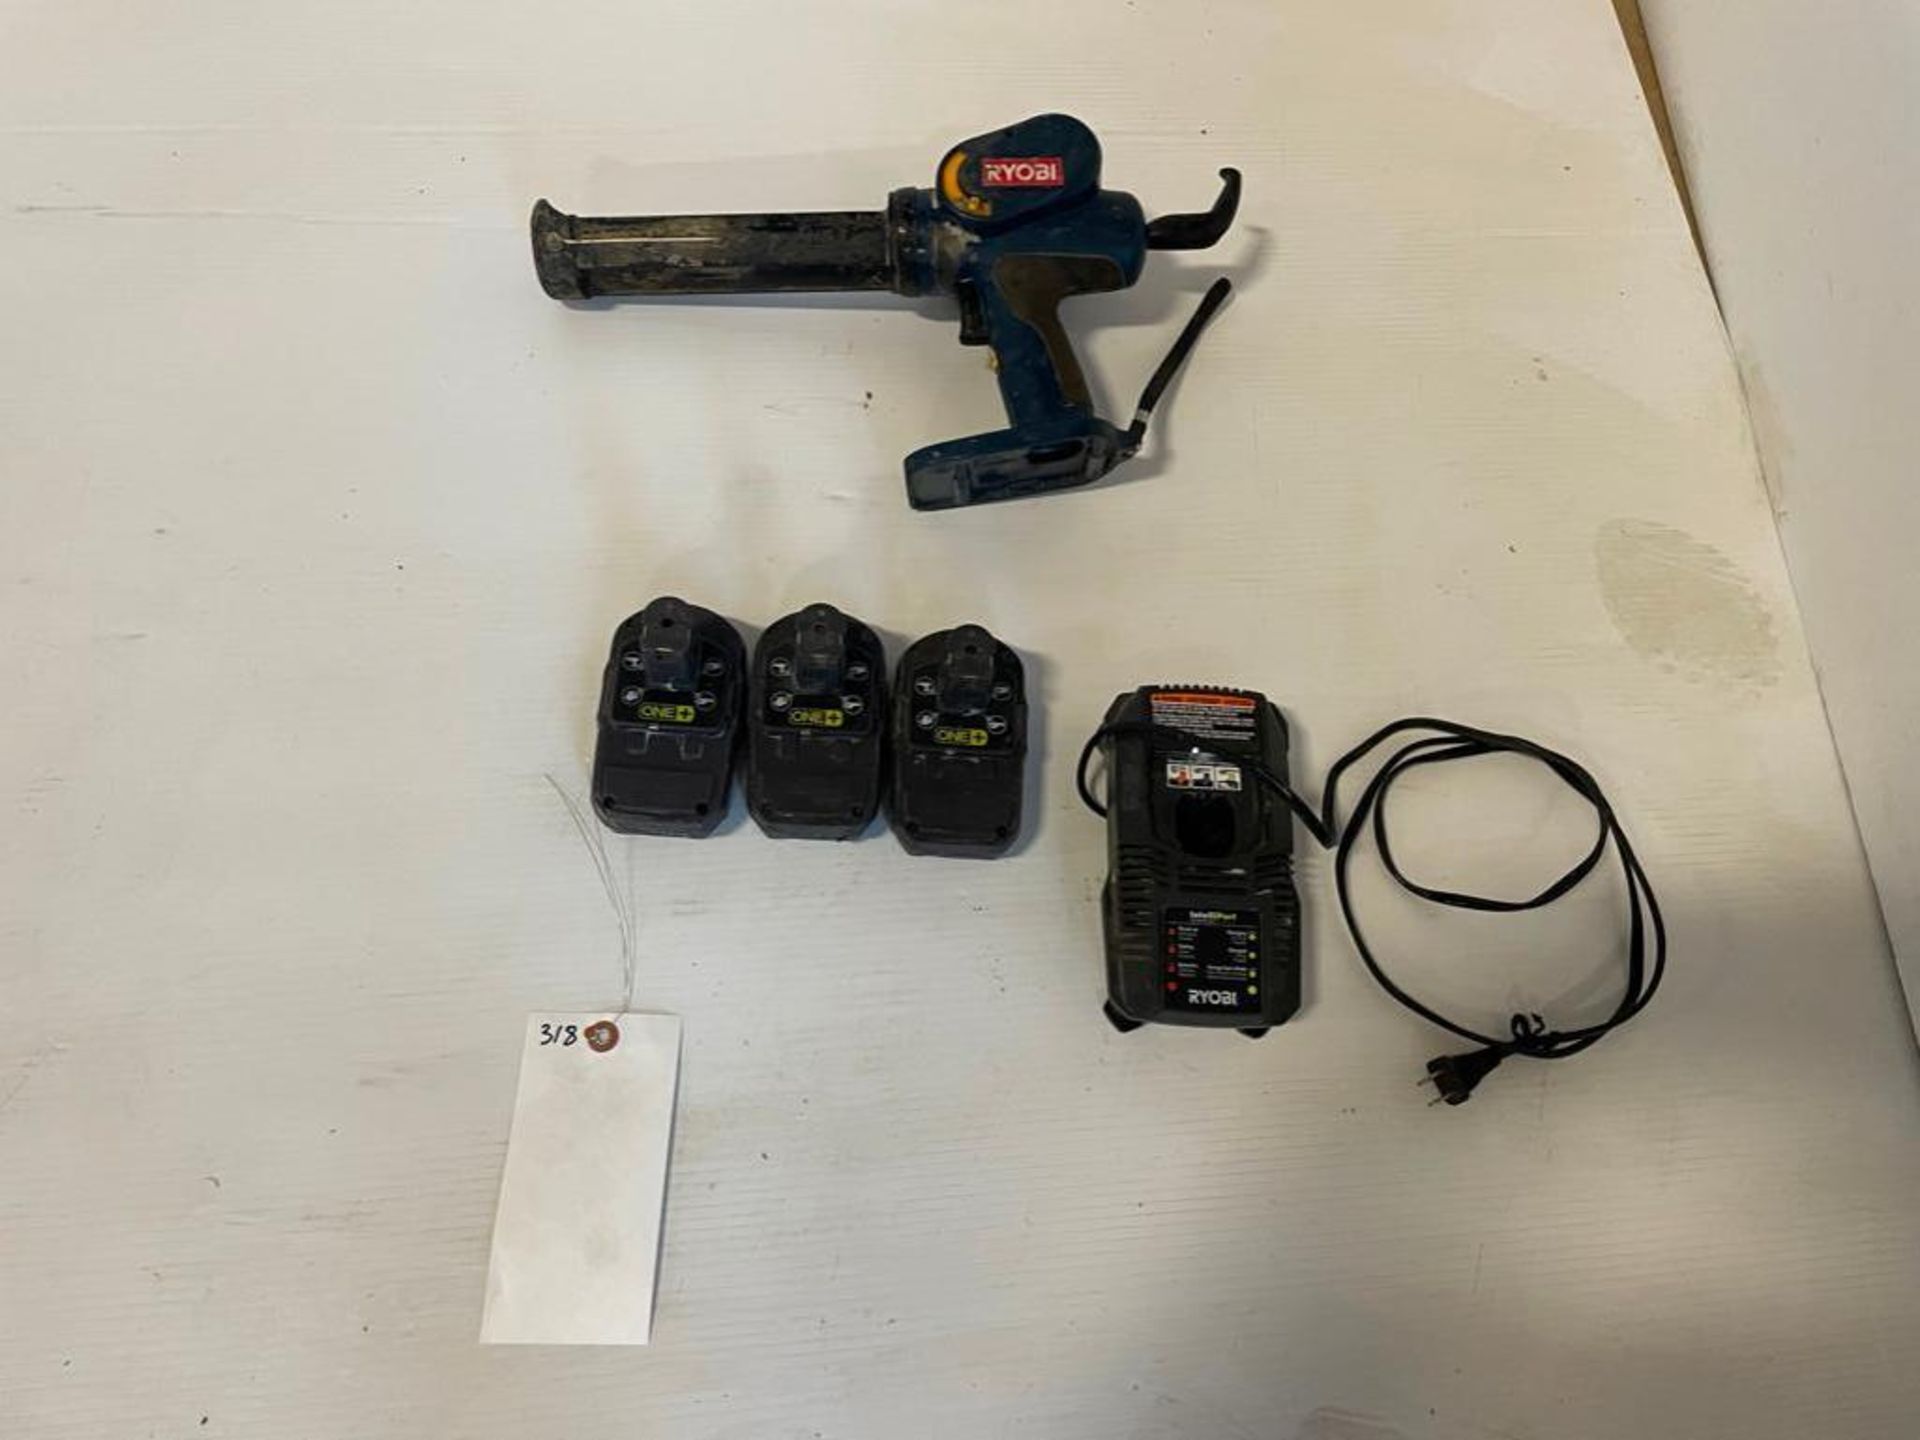 Ryobi R310 Power Caulk and Adhesive Gun w/Batteries & Charger . 18V. Located in Hazelwood, MO